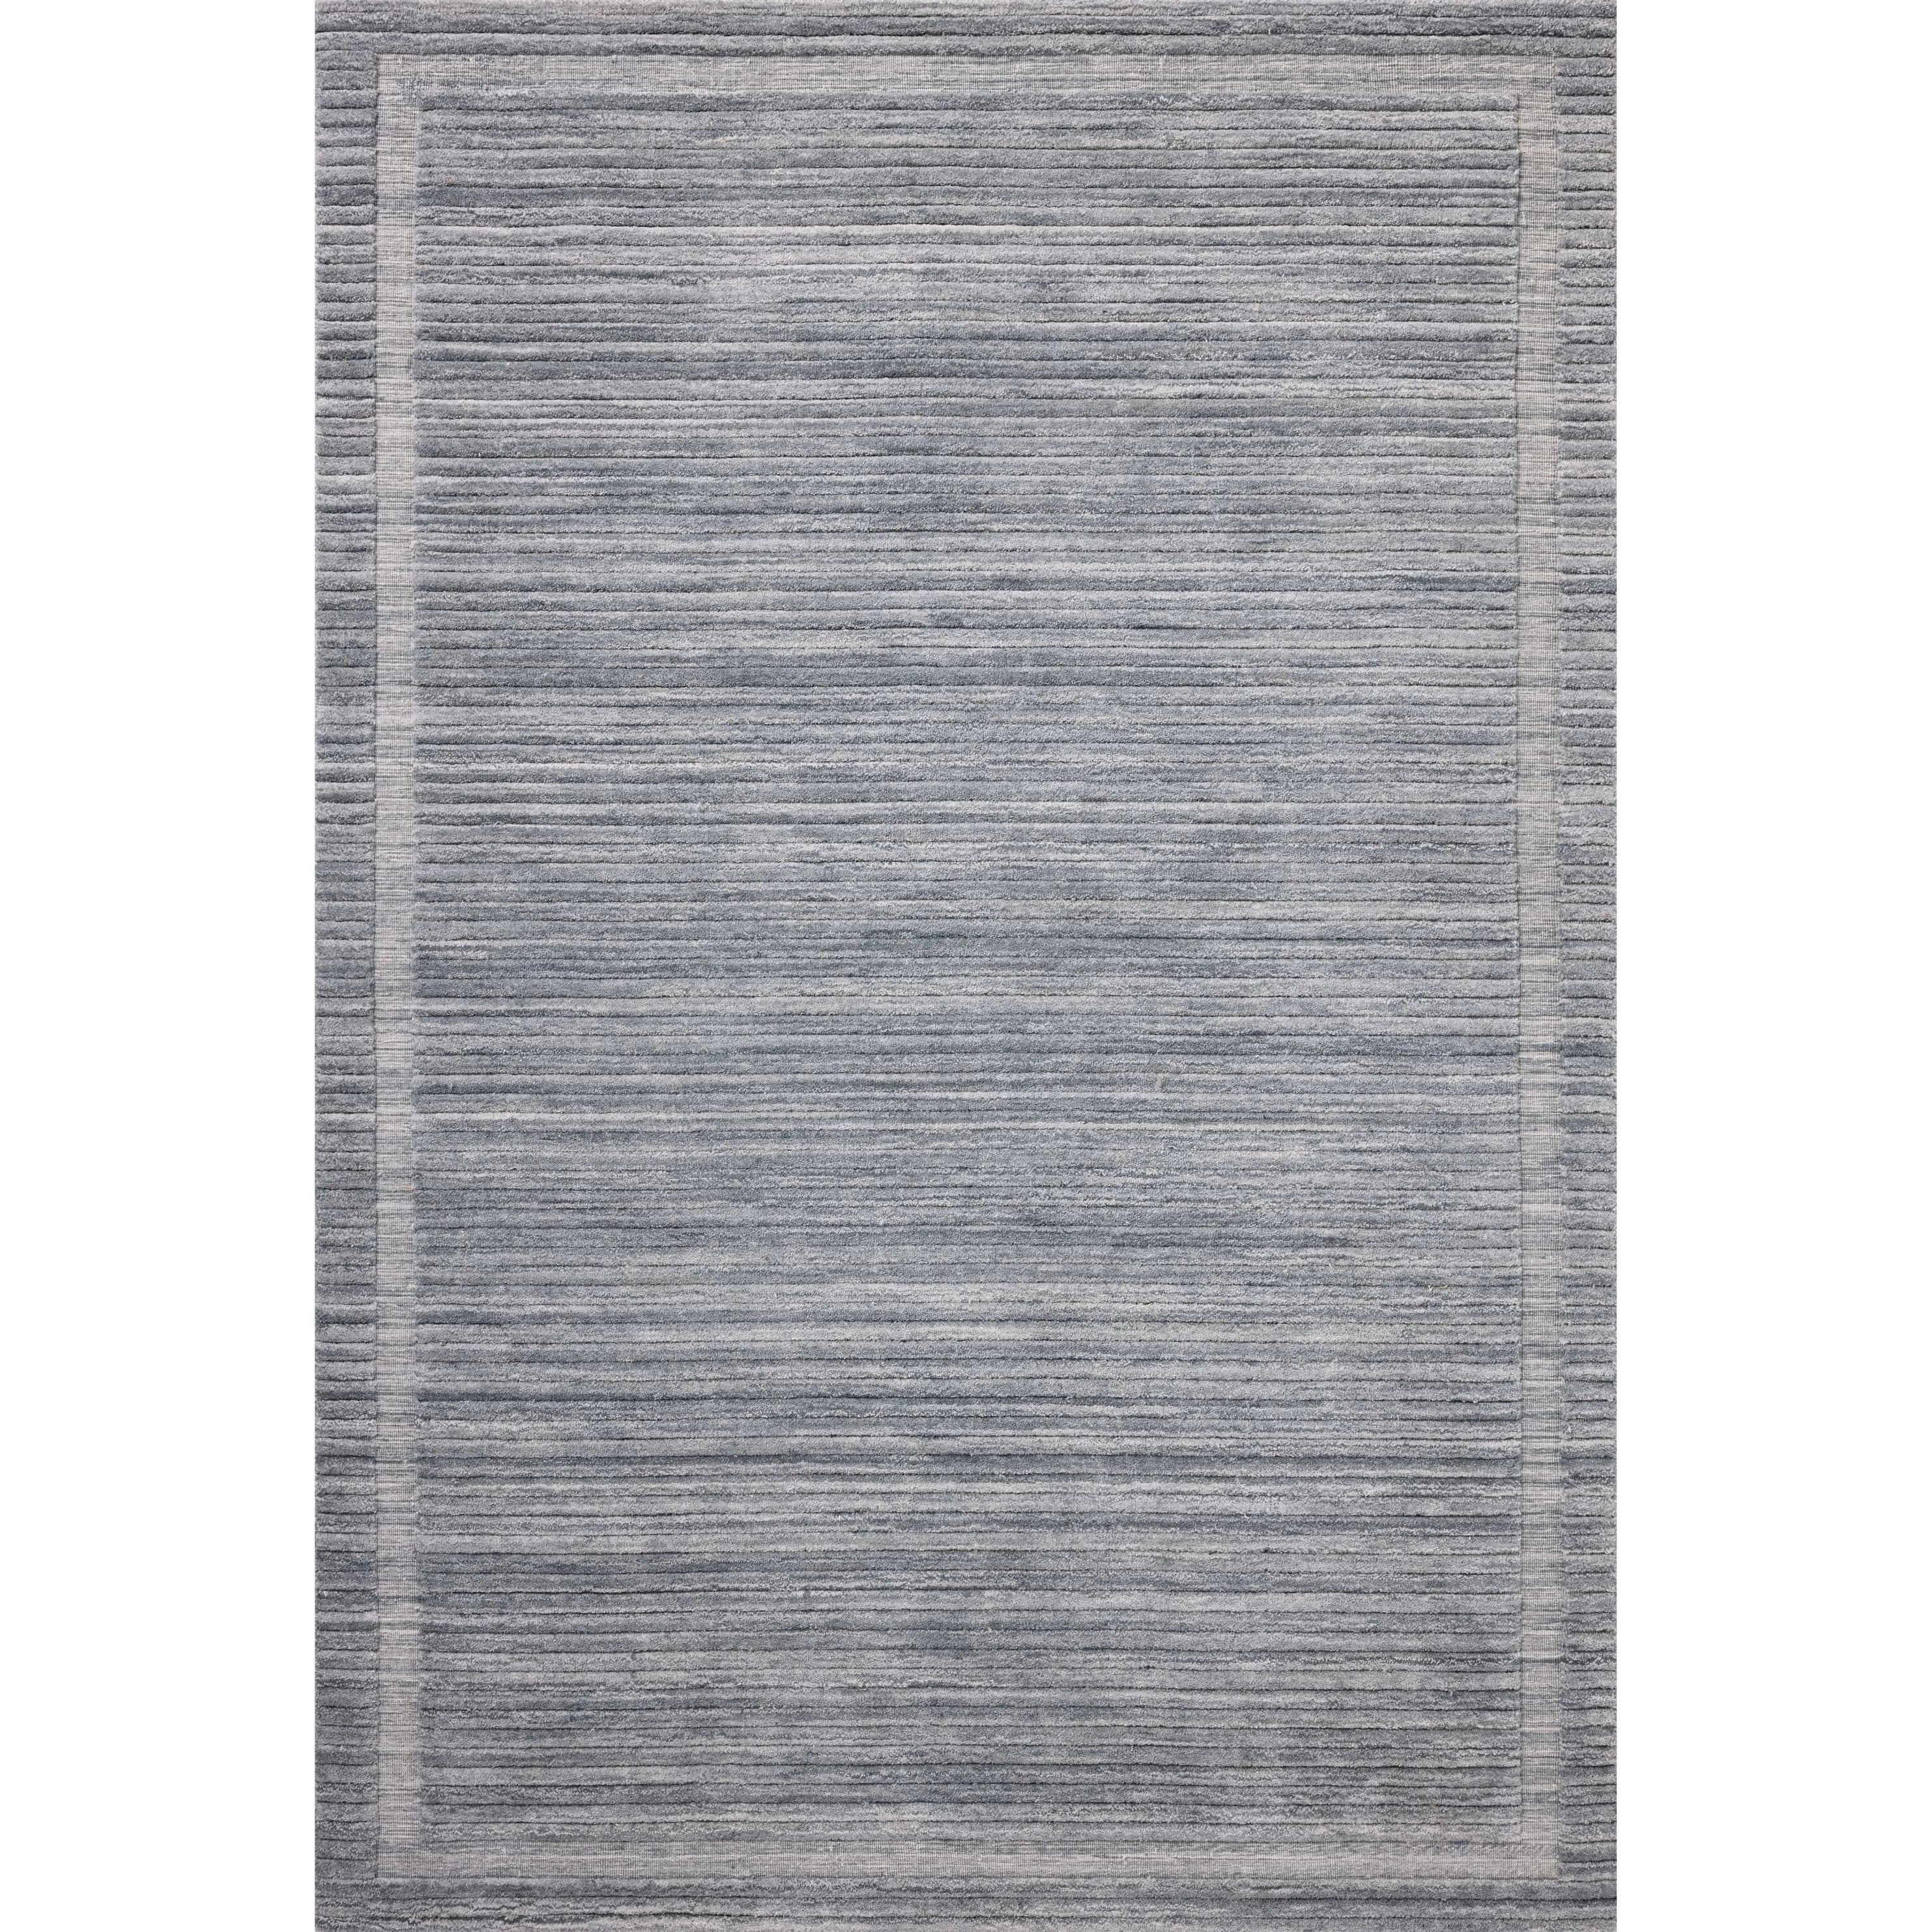 Irresistible to walk upon, the Dana Denim Rug by Brigette Romanek x Loloi has a high-low texture that alternates between a subtly shaggy pile and a soft base. Horizontal broken stripes give the area rug a fresh and energized structure, while a finish of fringe along the edges accentuates its sense of movement. Amethyst Home provides interior design, new home construction design consulting, vintage area rugs, and lighting in the Portland metro area.